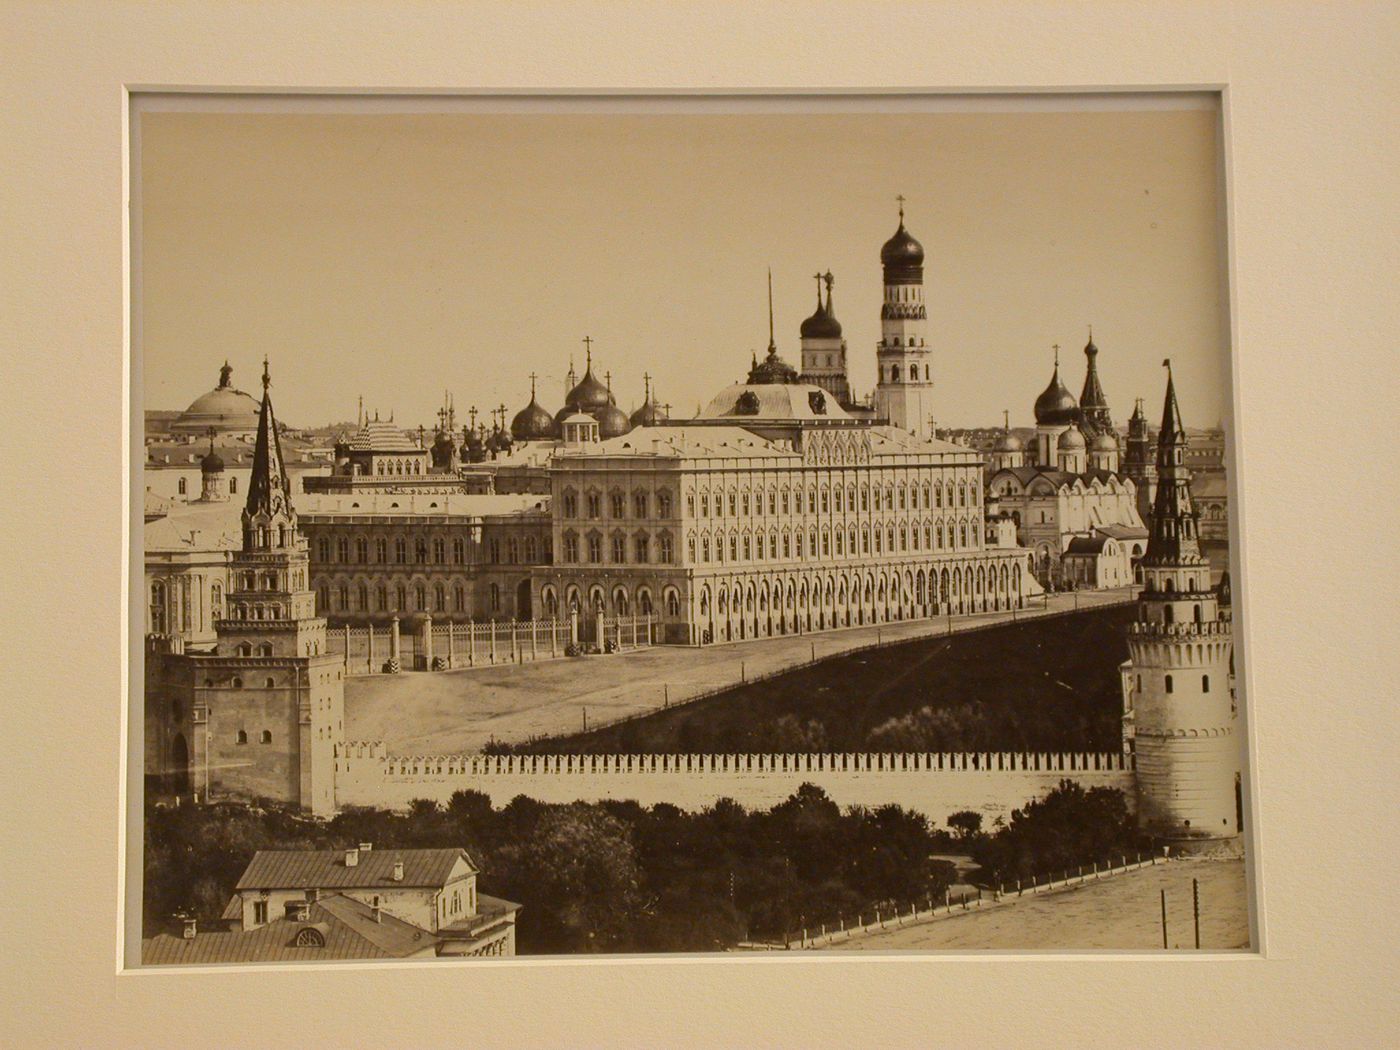 View of the Big Kremlin Palace with the Vodovzvodnaya Tower (Water-pumping Tower) and the Borovitskaia Tower, Moscow